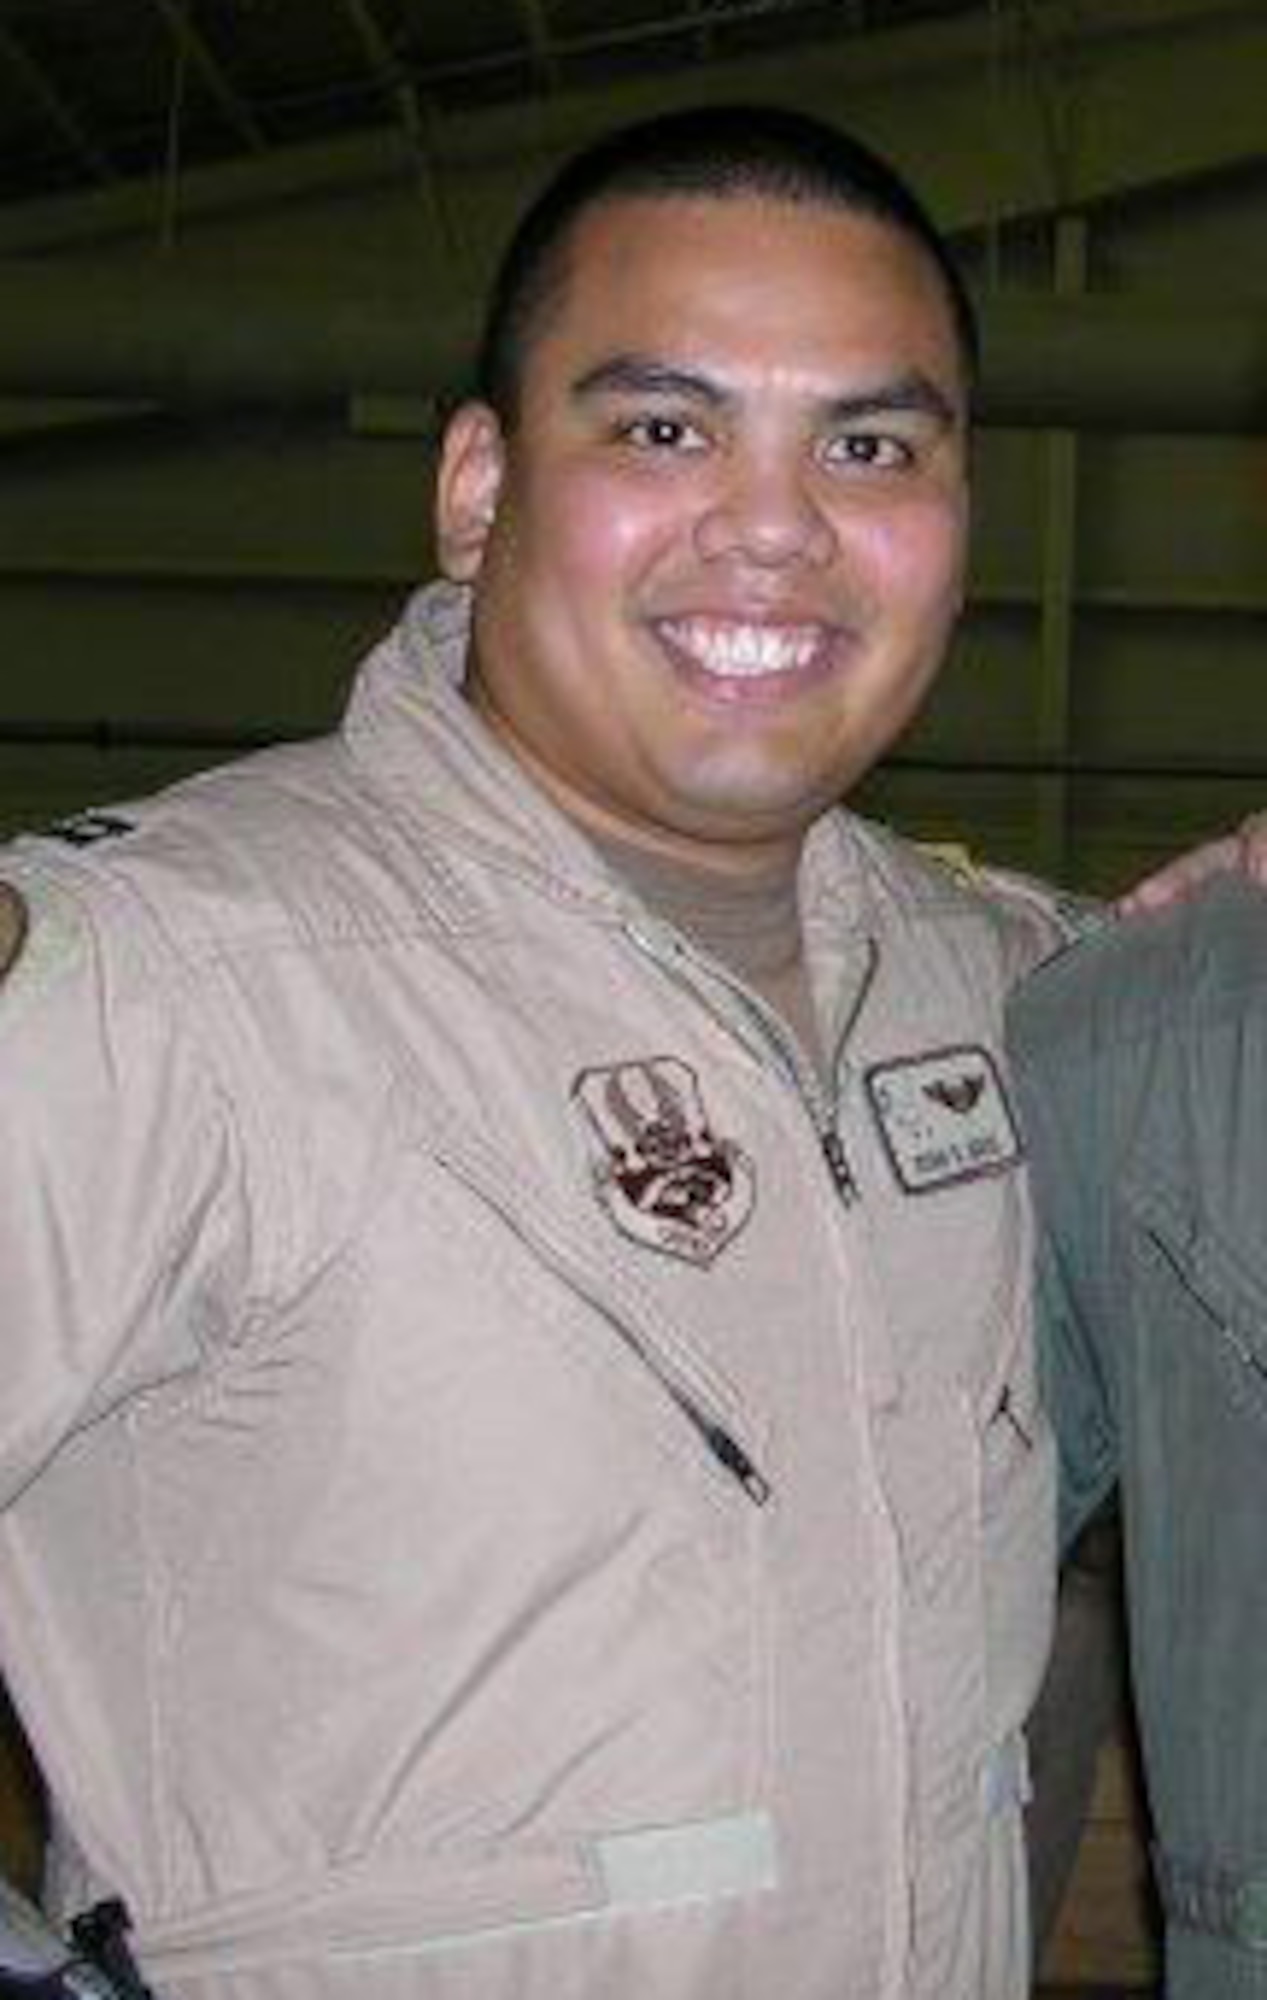 C-130 navigator Maj. Ryan S. David, one of 4 crew members who were killed July 1, 2012 after their C-130 crashed while fighting wildfires in South Dakota. (courtesy photo)
